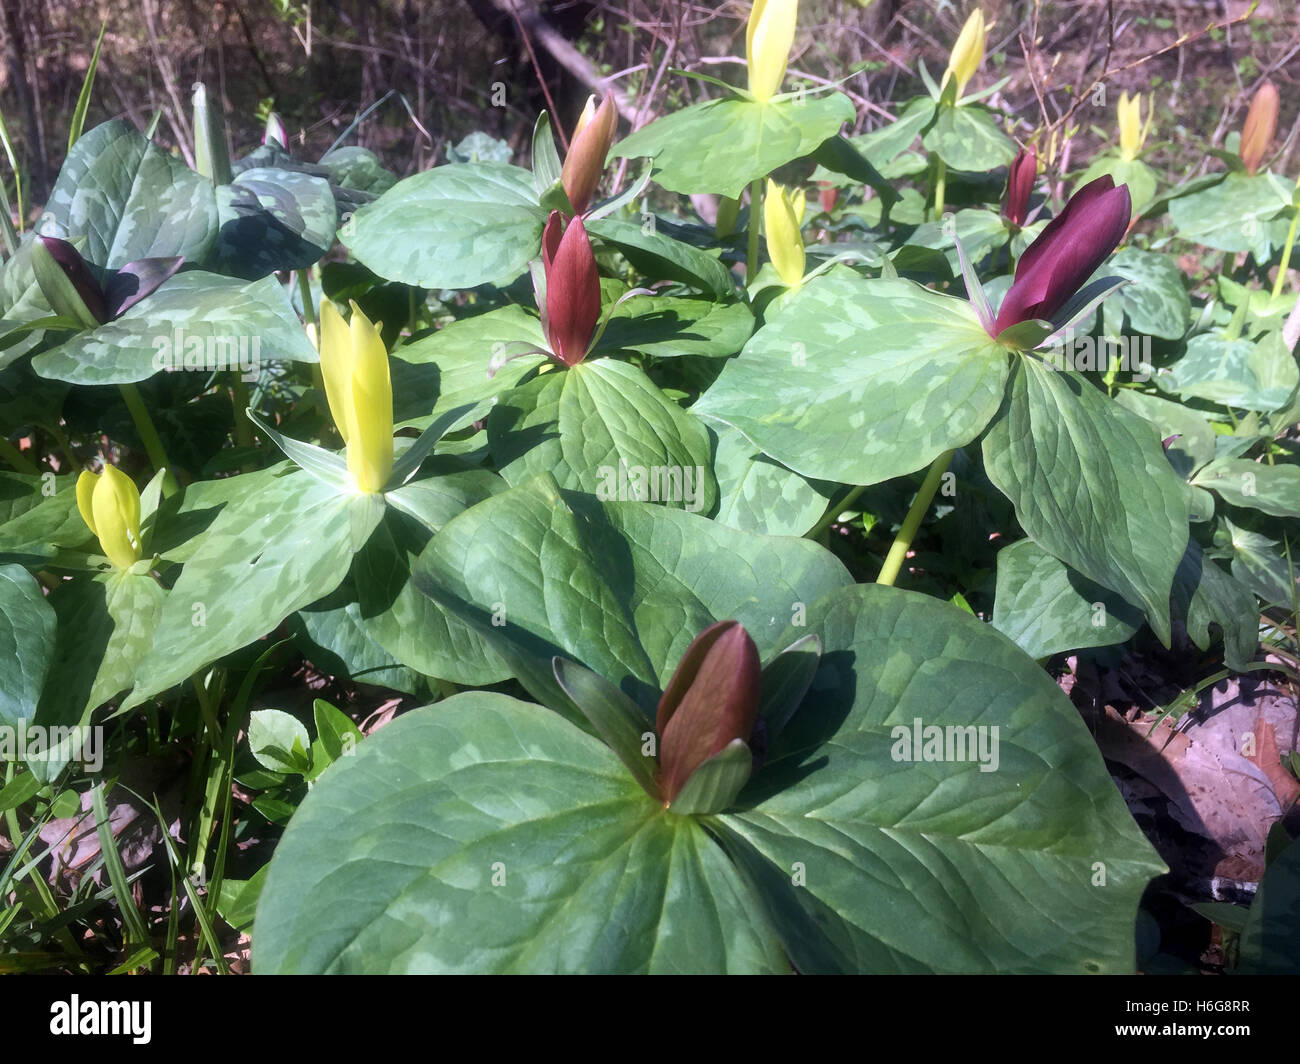 A group of trillium (Trillium luteum) growing at an arboretum in Tennessee Stock Photo